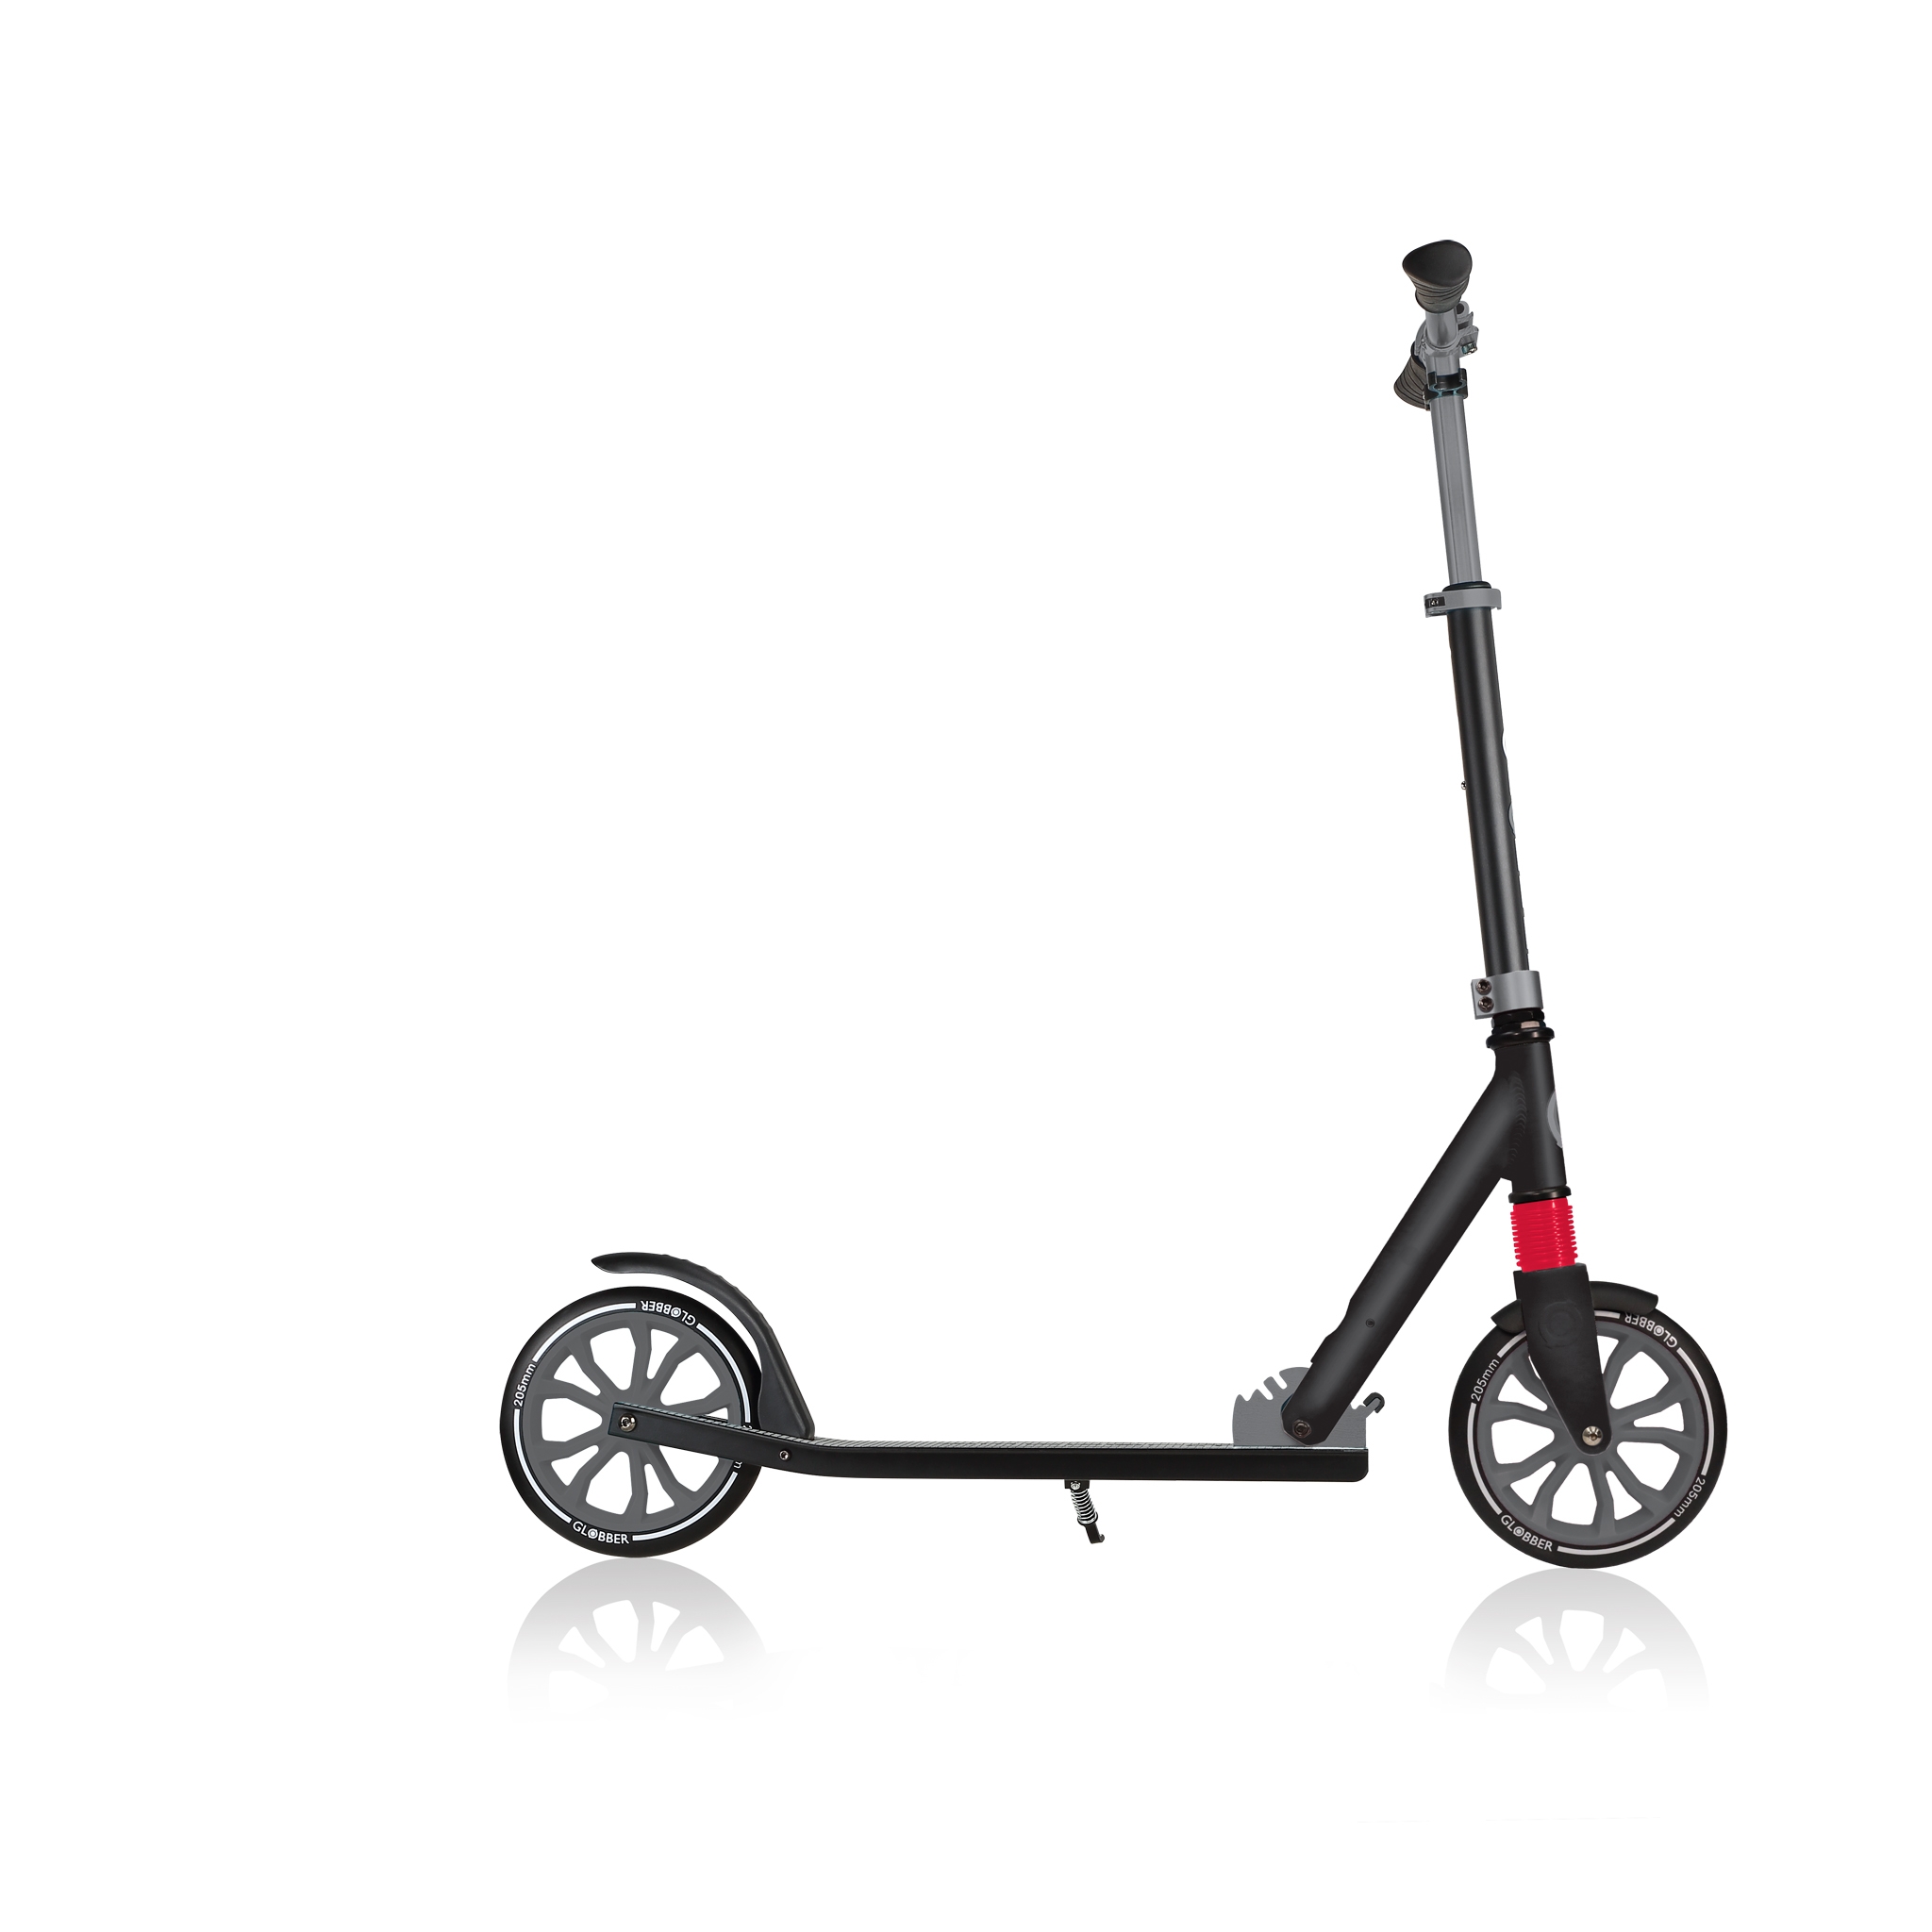 Globber-NL-205-collapsible-2-wheel-scooter-for-kids-with-big-wheels-205mm 3